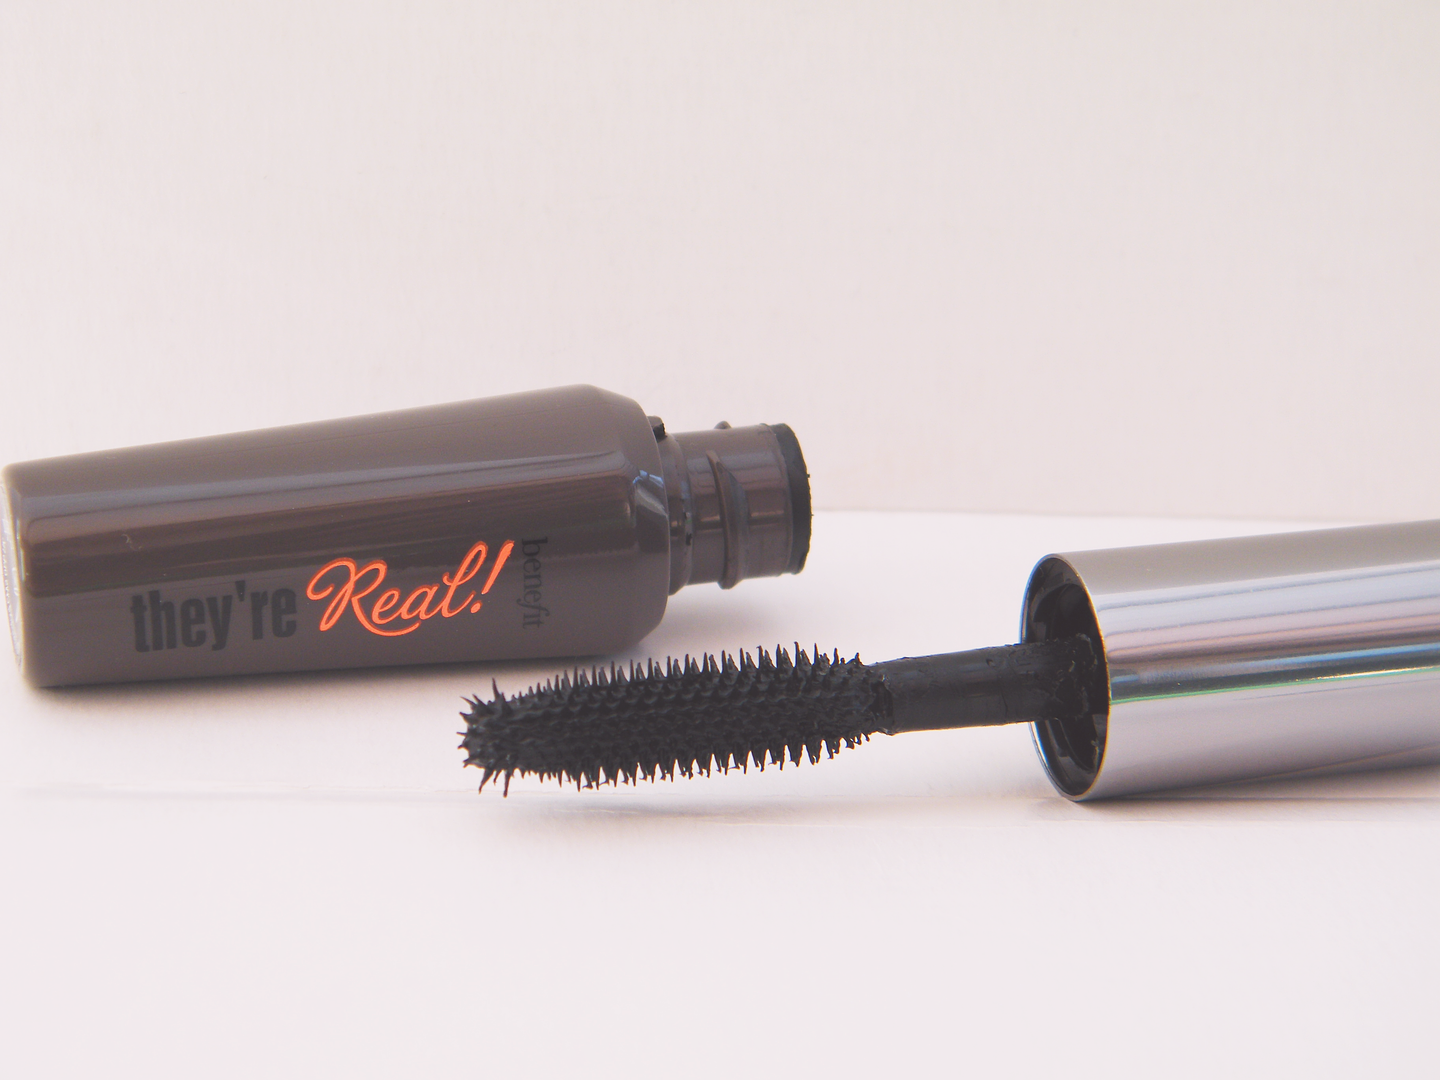 Benefit 'They're Real' Mascara